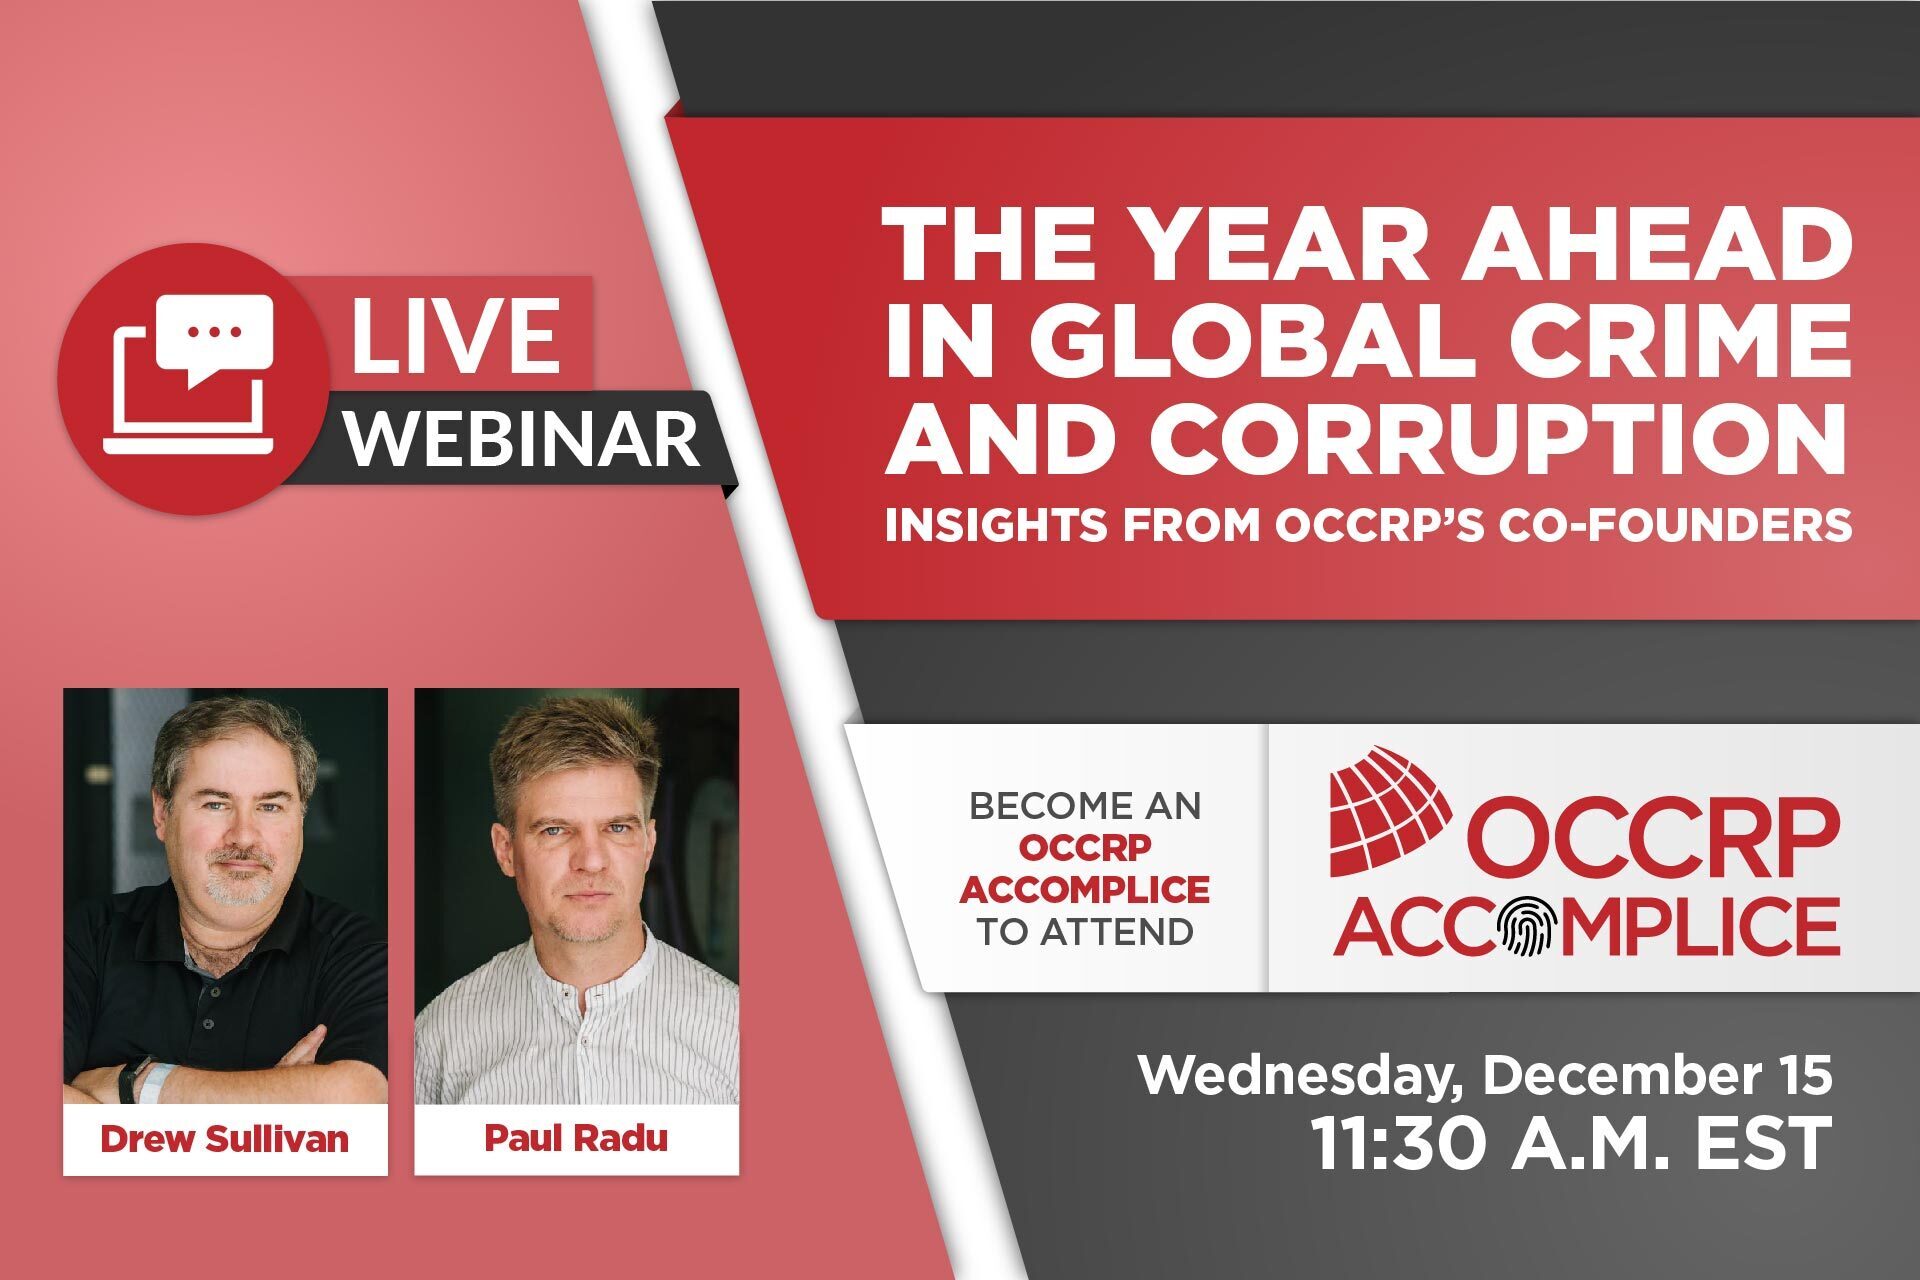 The Year Ahead in Global Crime and Corruption: OCCRP Co-Founders Drew Sullivan and Paul Radu Discuss 2022 Outlook in Virtual Event